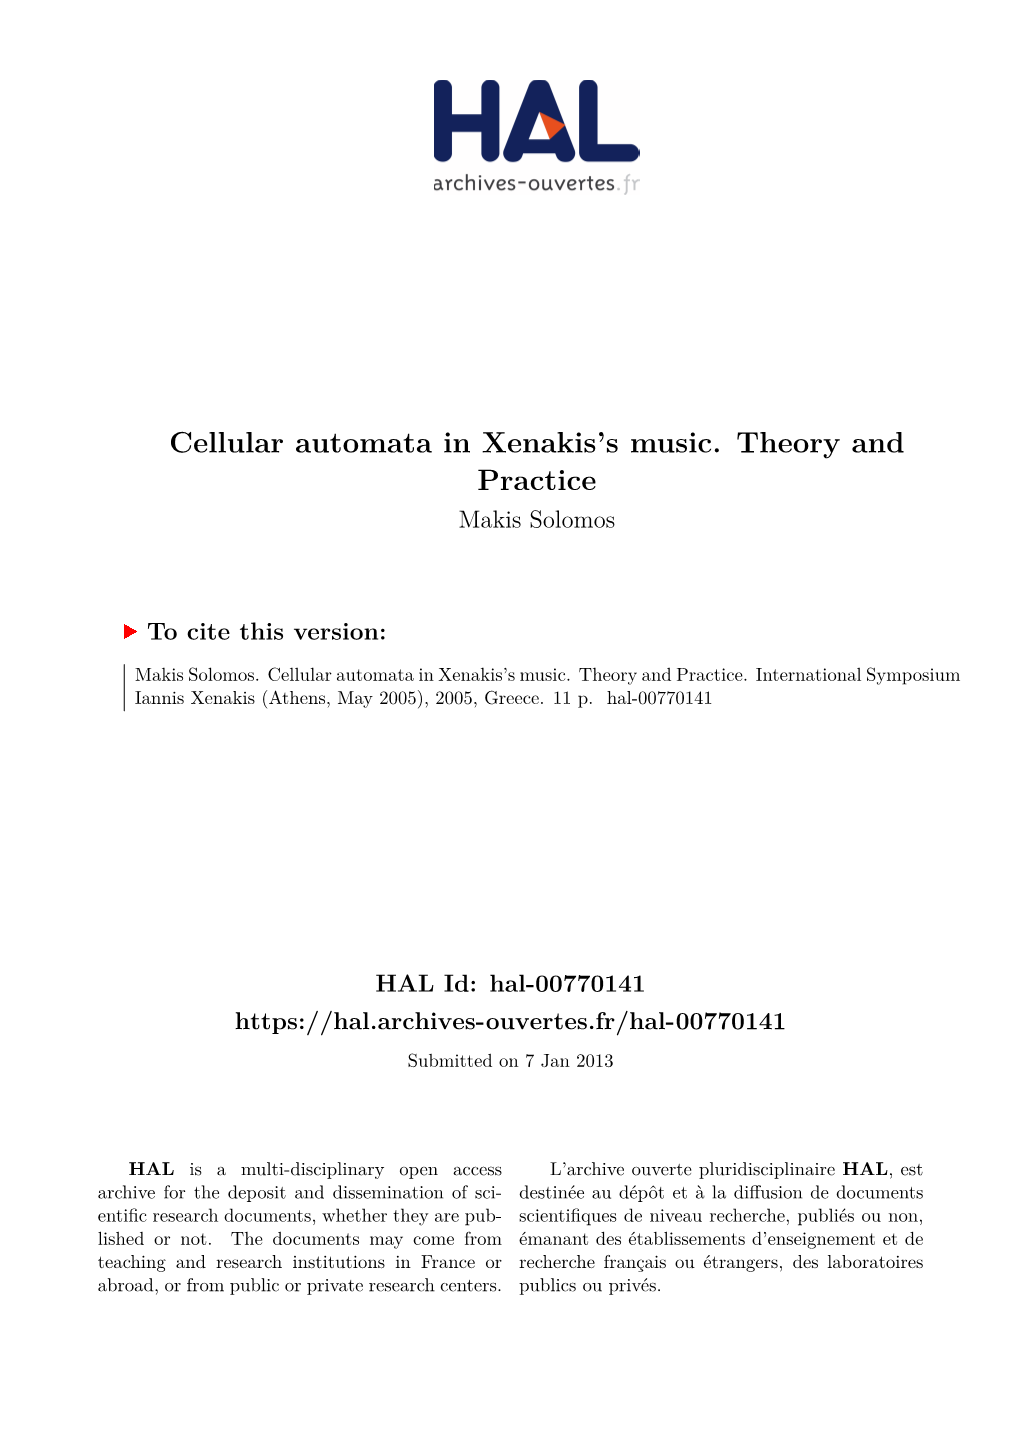 Cellular Automata in Xenakis's Music. Theory and Practice